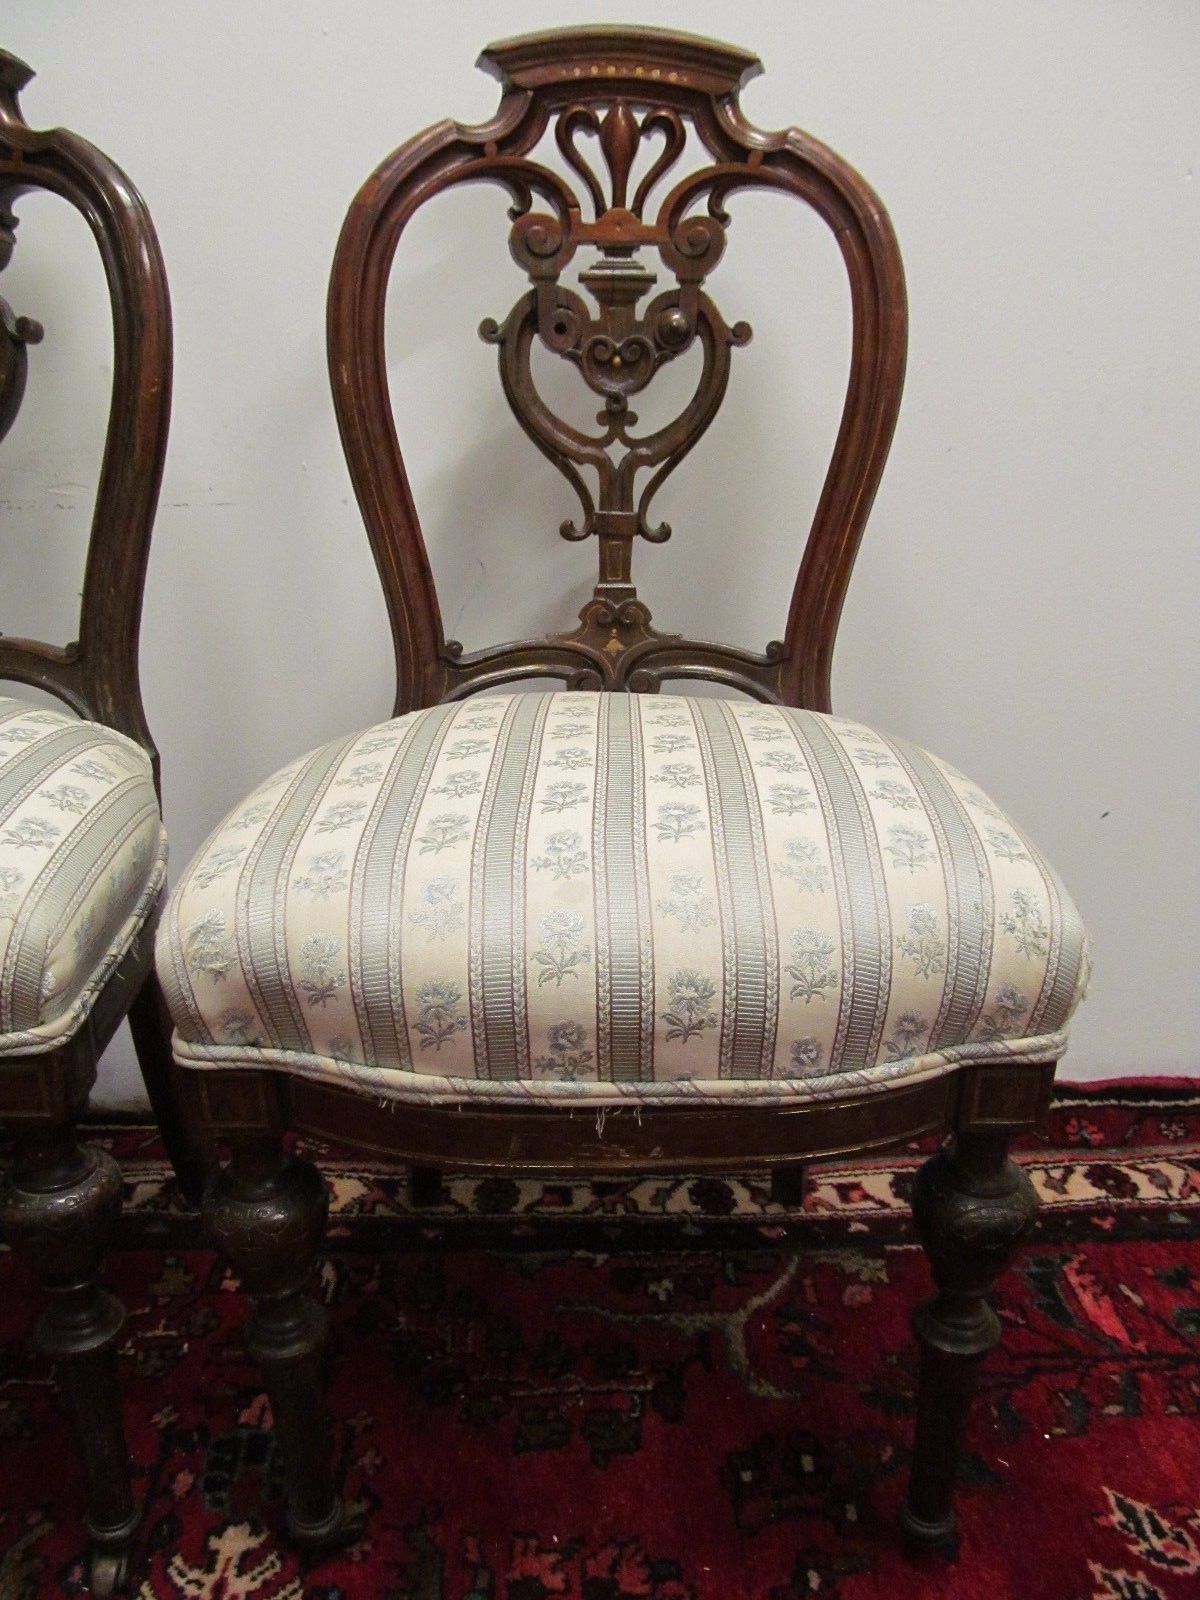 PAIR OF VICTORIAN WALNUT PARLOR CHAIRS WITH FINELY CARVED BACK SPLATS